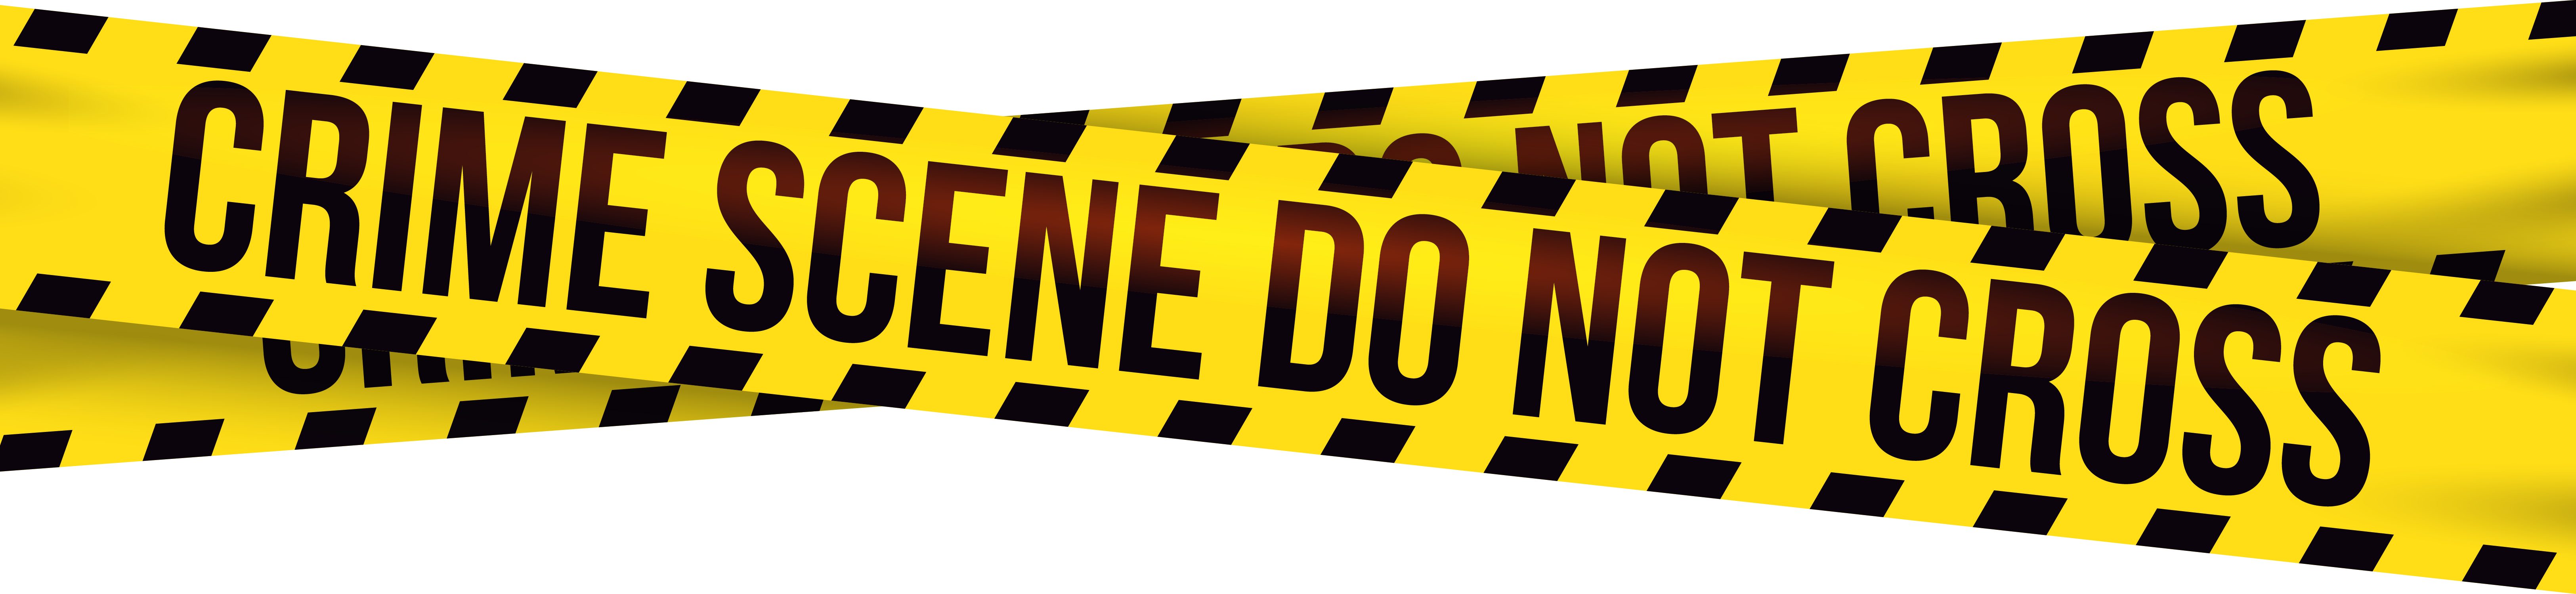 Evidence clipart evidence tape. Police barricade png clip